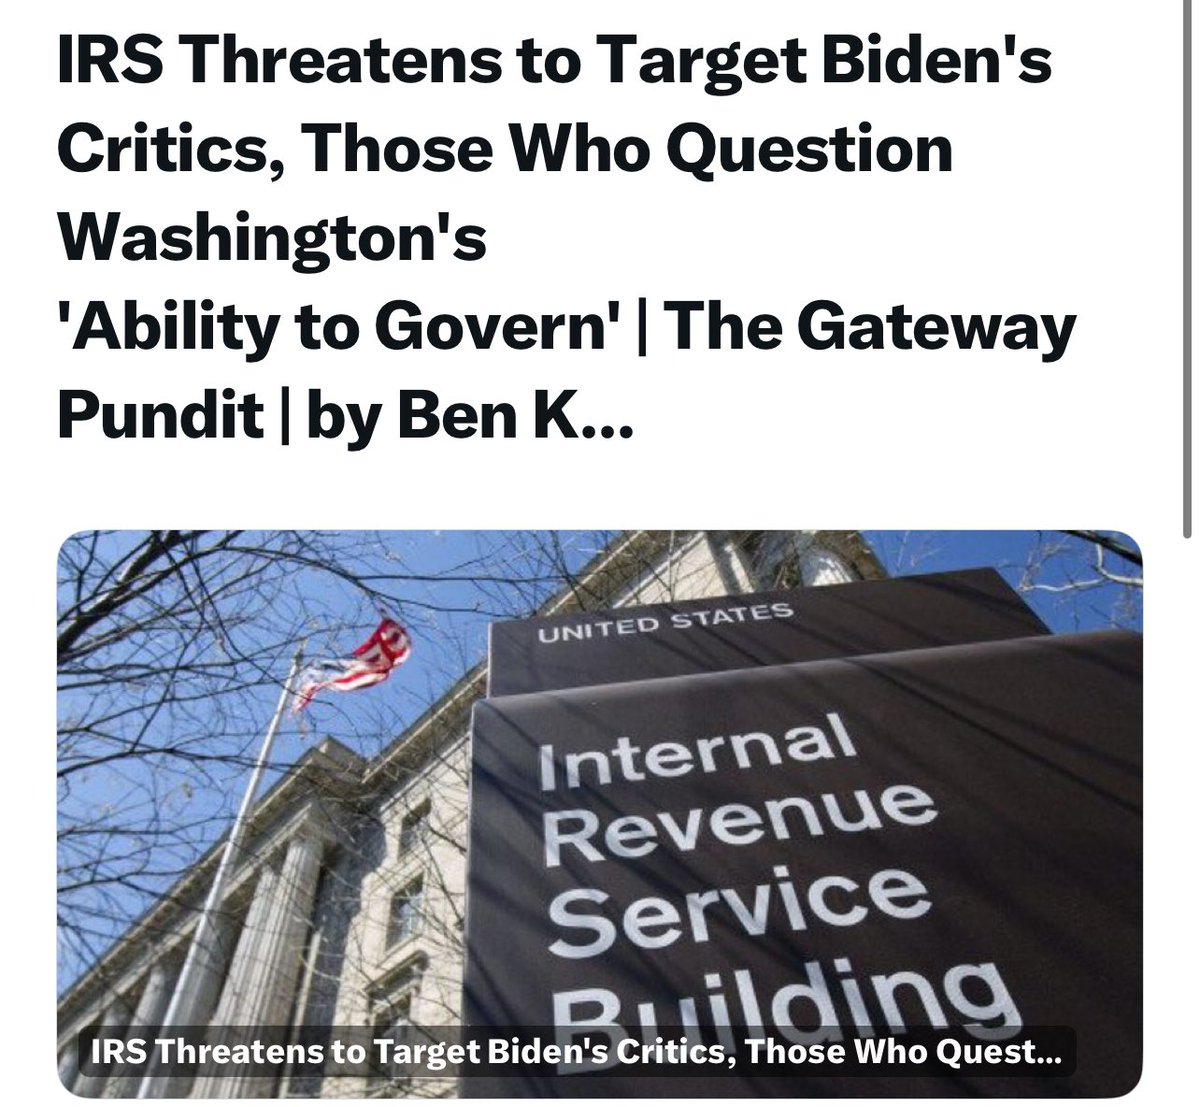 Speakers Johnson & McCarthy , thanks for fucking us. 

87,000 IRS Agents.